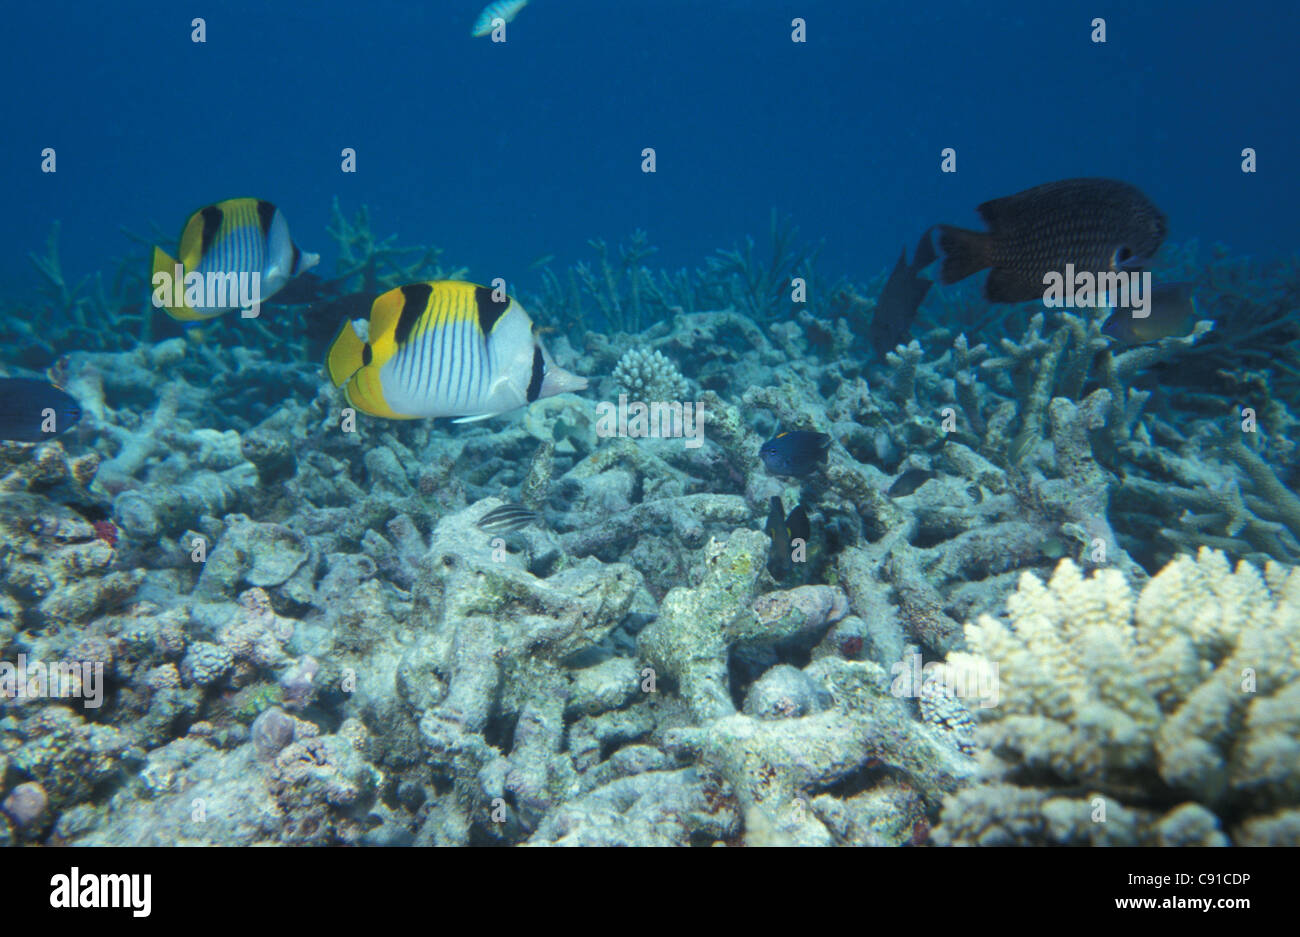 Double saddled Butterflyfish - Black-wedged Butterflyfish - Saddleback butterflyfish (Chaetodon falcula) swimming on coral reef Stock Photo